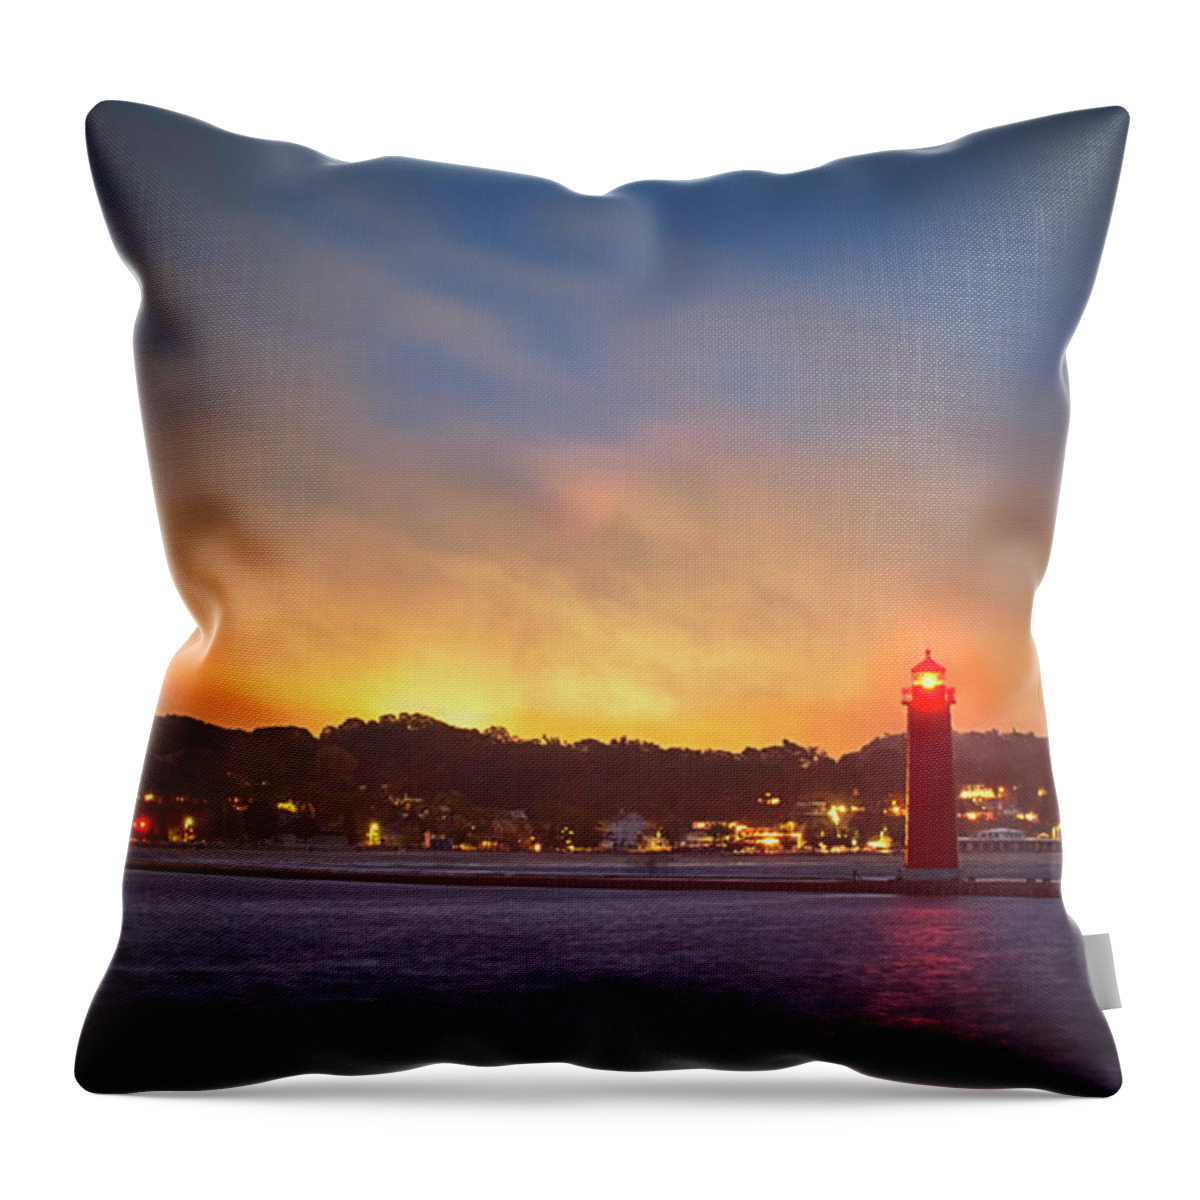 Lake Michigan Throw Pillow featuring the photograph Last Night at Grand Haven by Michael J Samuels